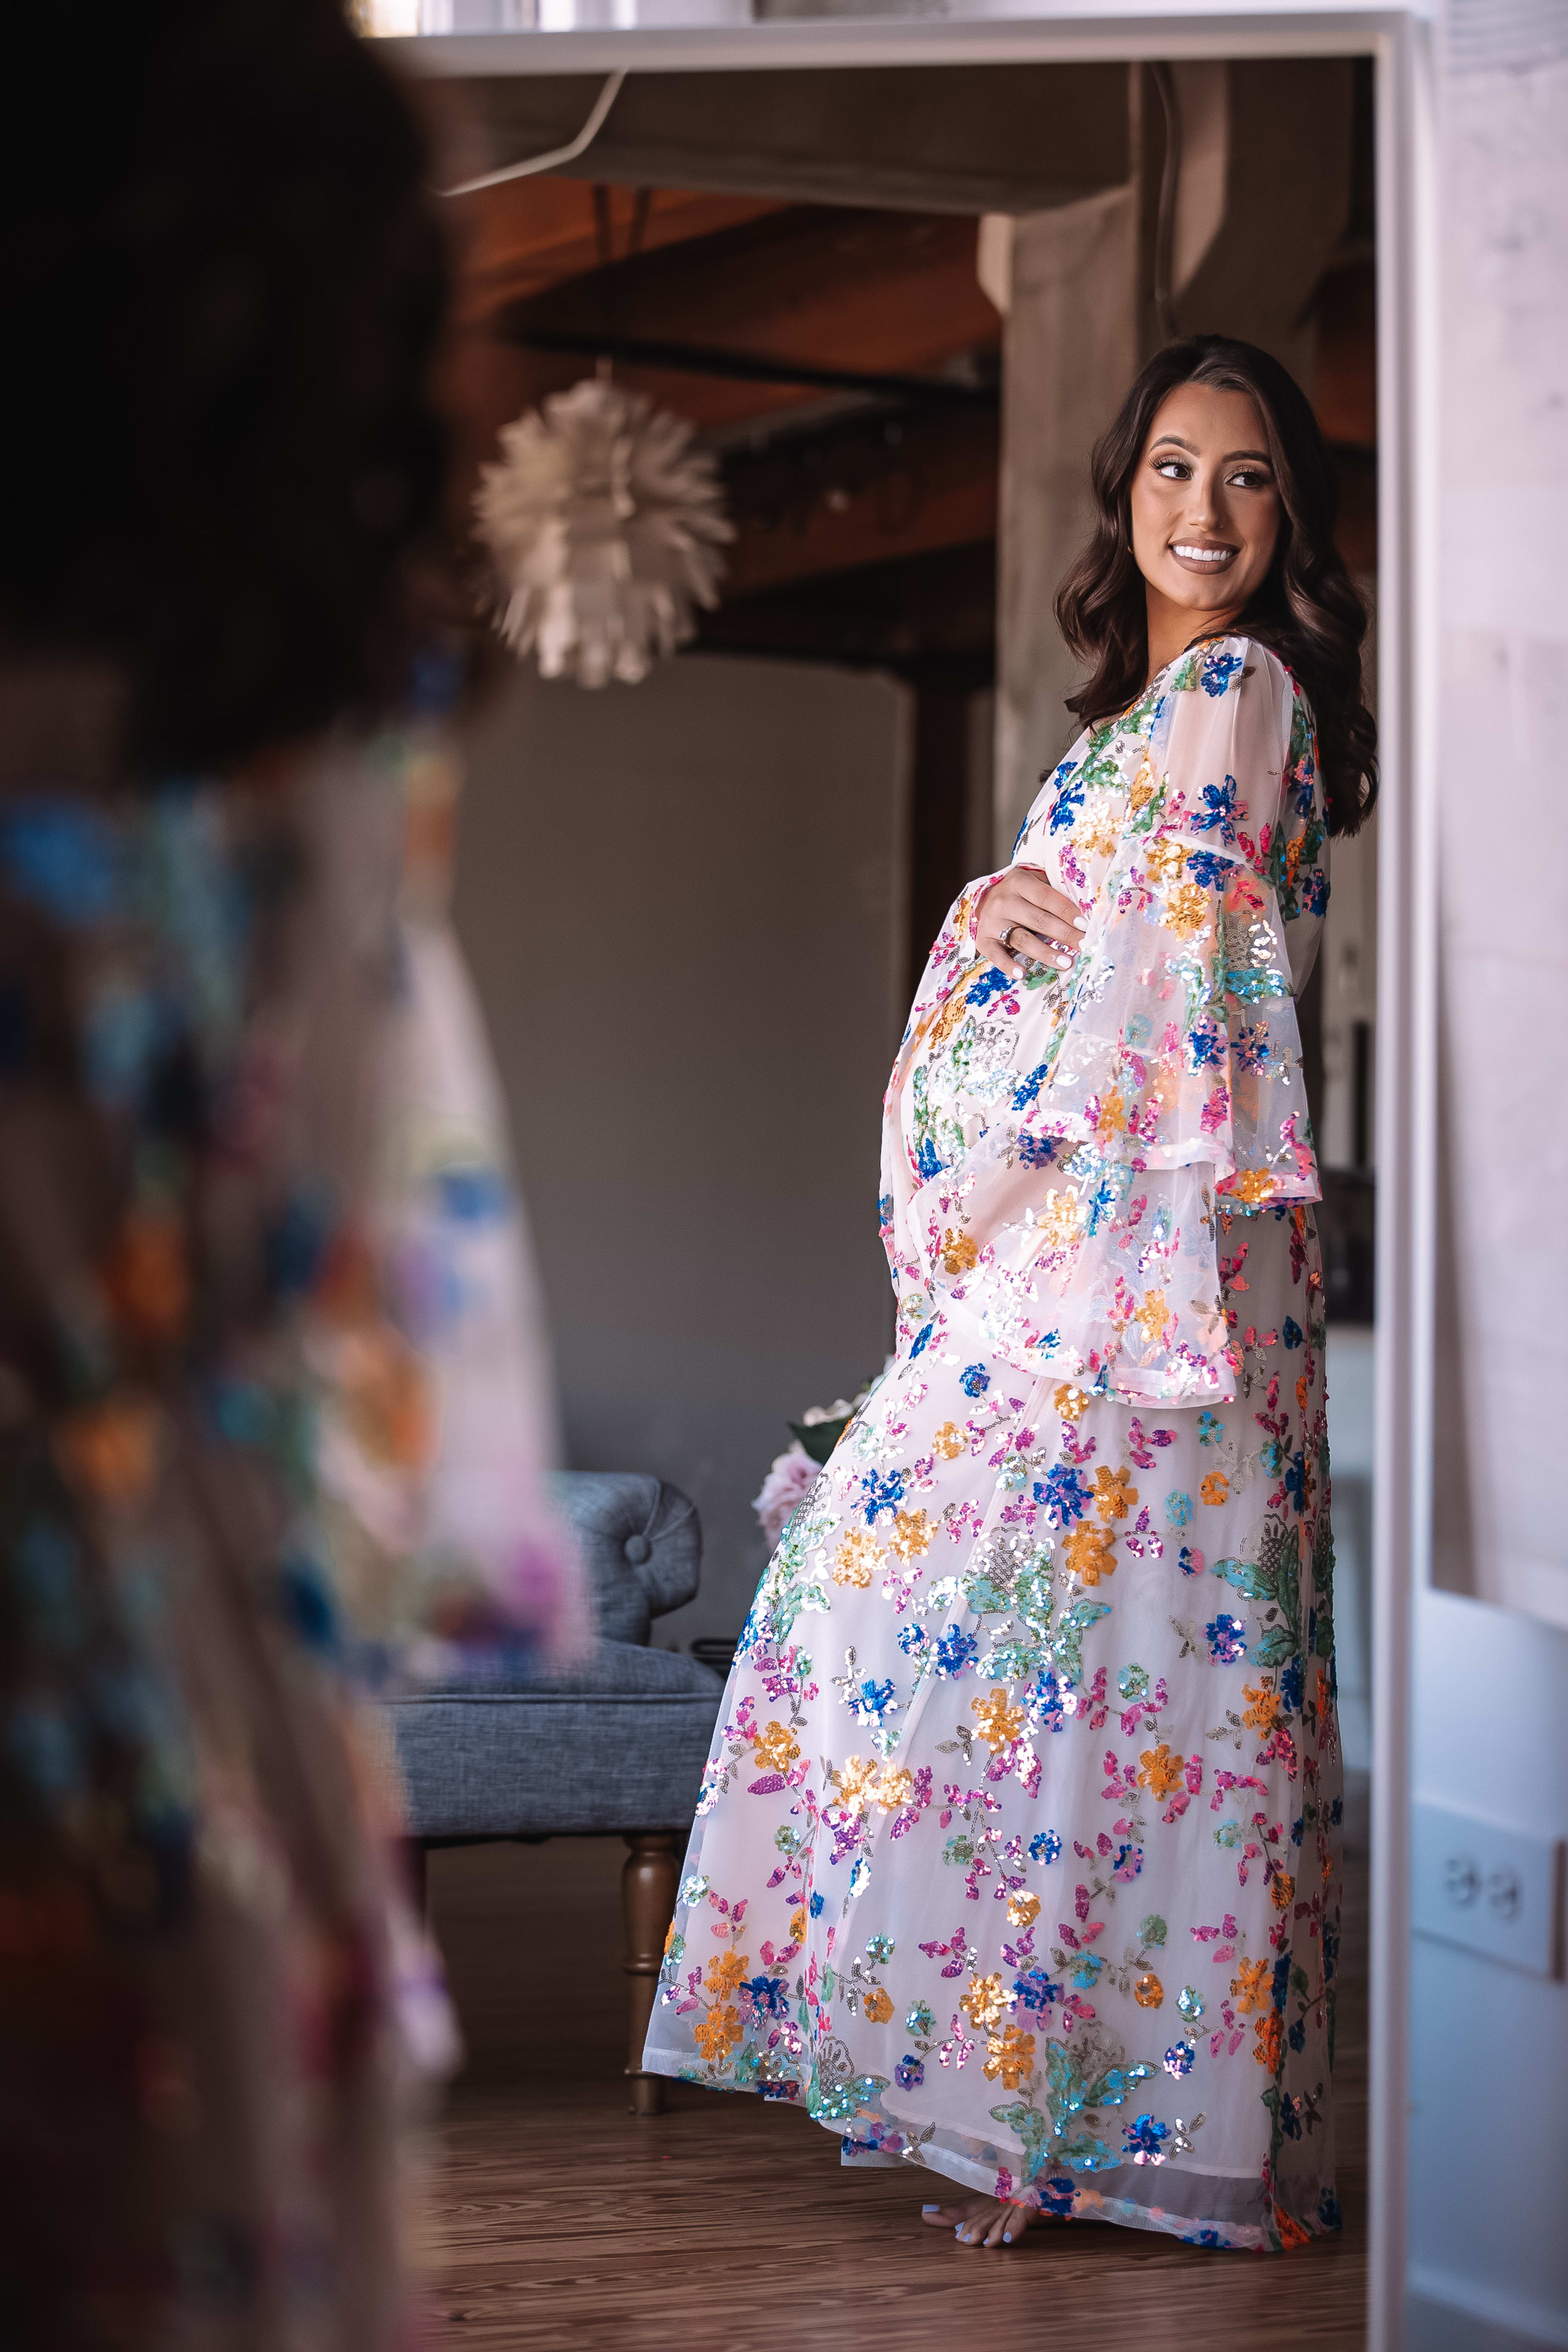 A maternity photoshoot of a pregnant woman in a floral dress standing in front of a rustic mirror.